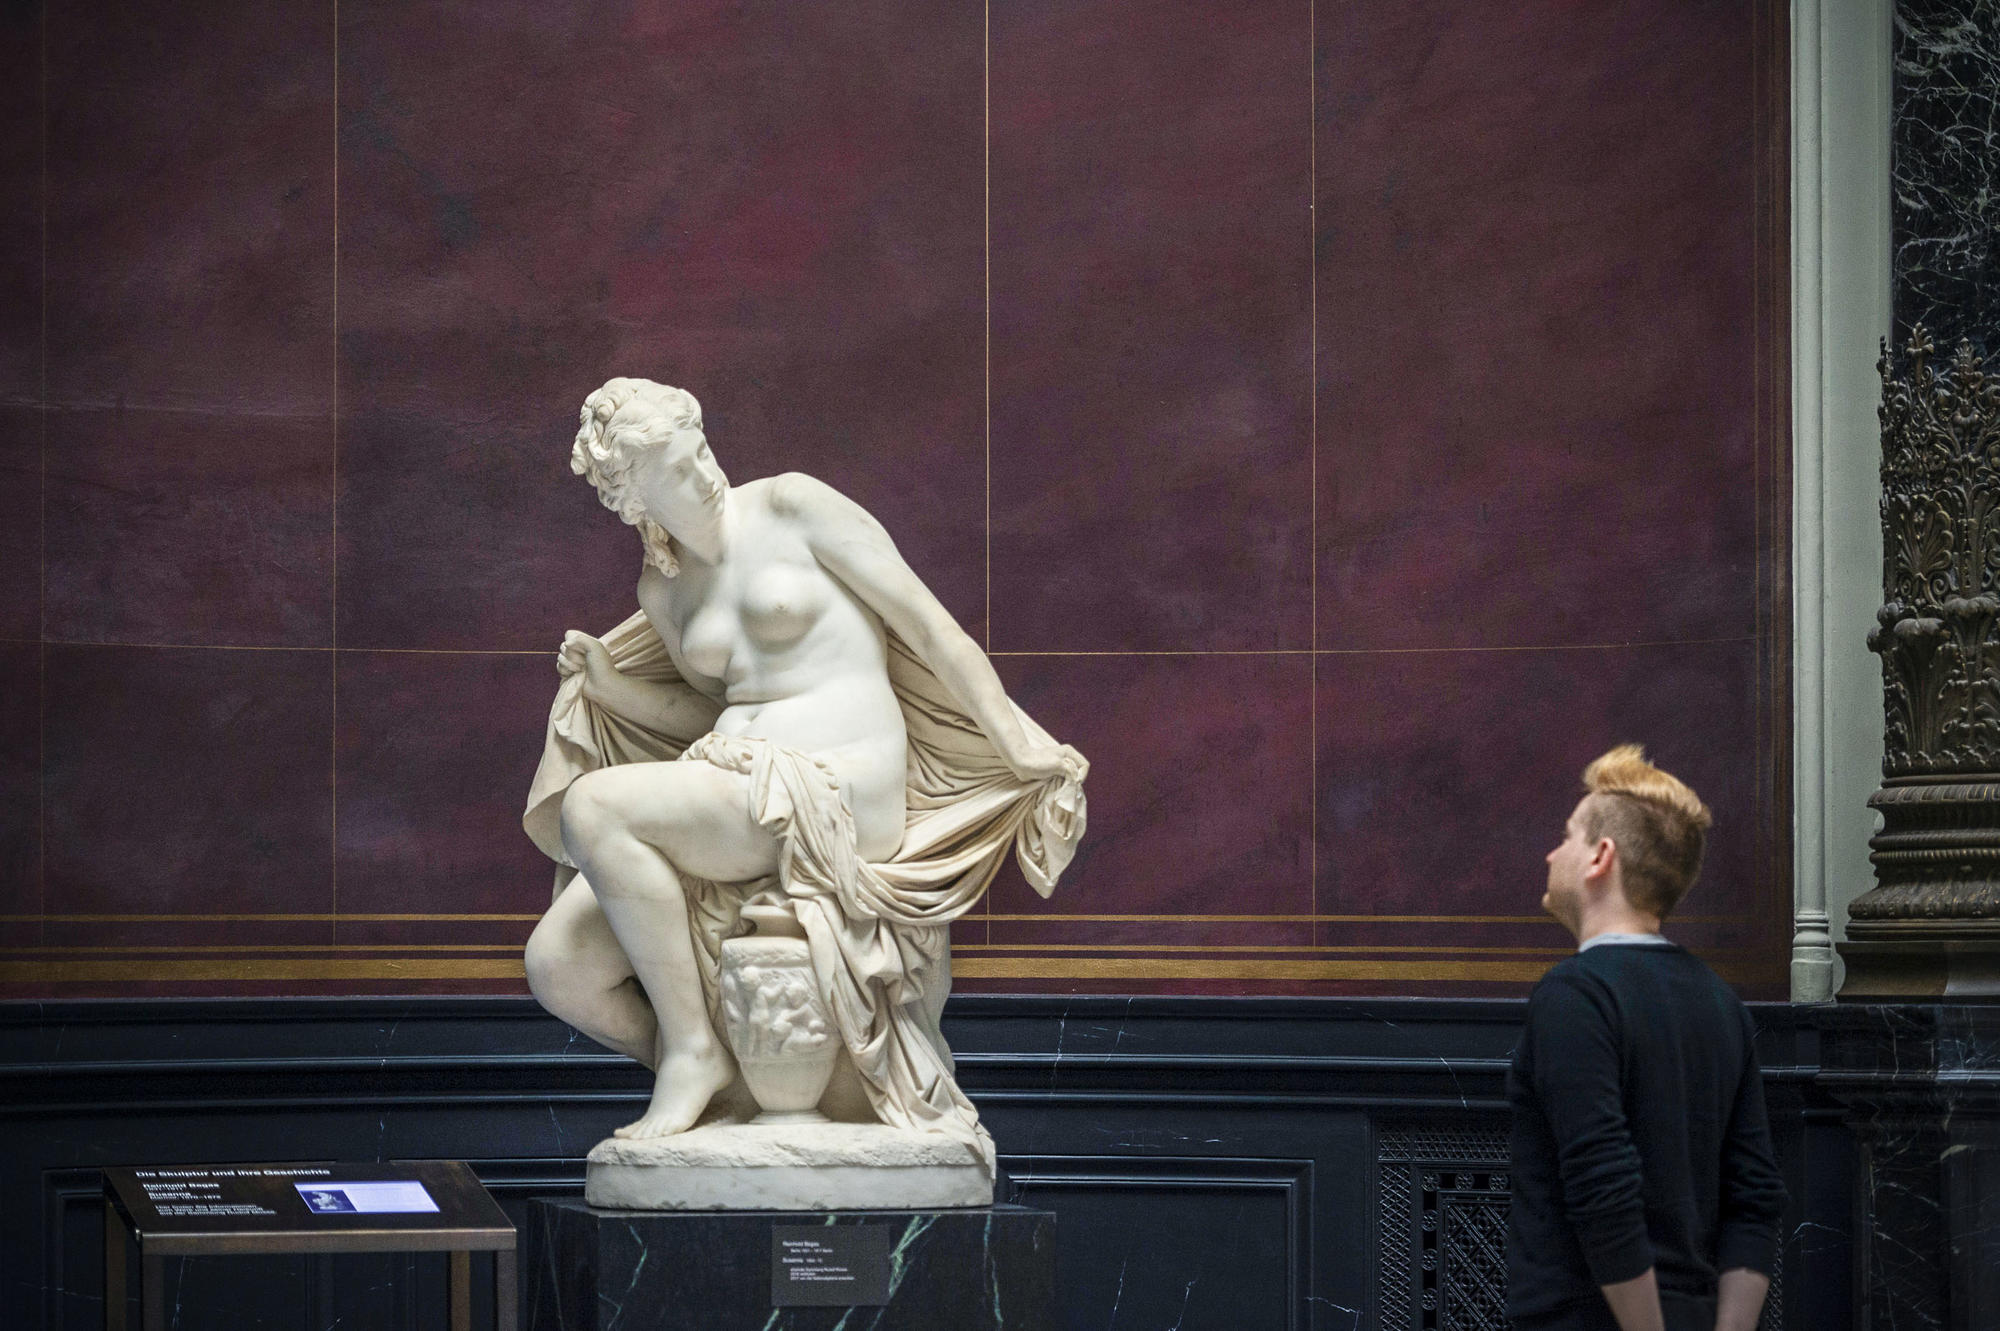 The figure “Susanna” by sculptor Reinhold Begas is in the Alte Nationalgalerie Berlin. It was part of the art collection of the German-Jewish publisher Rudolf Mosse.